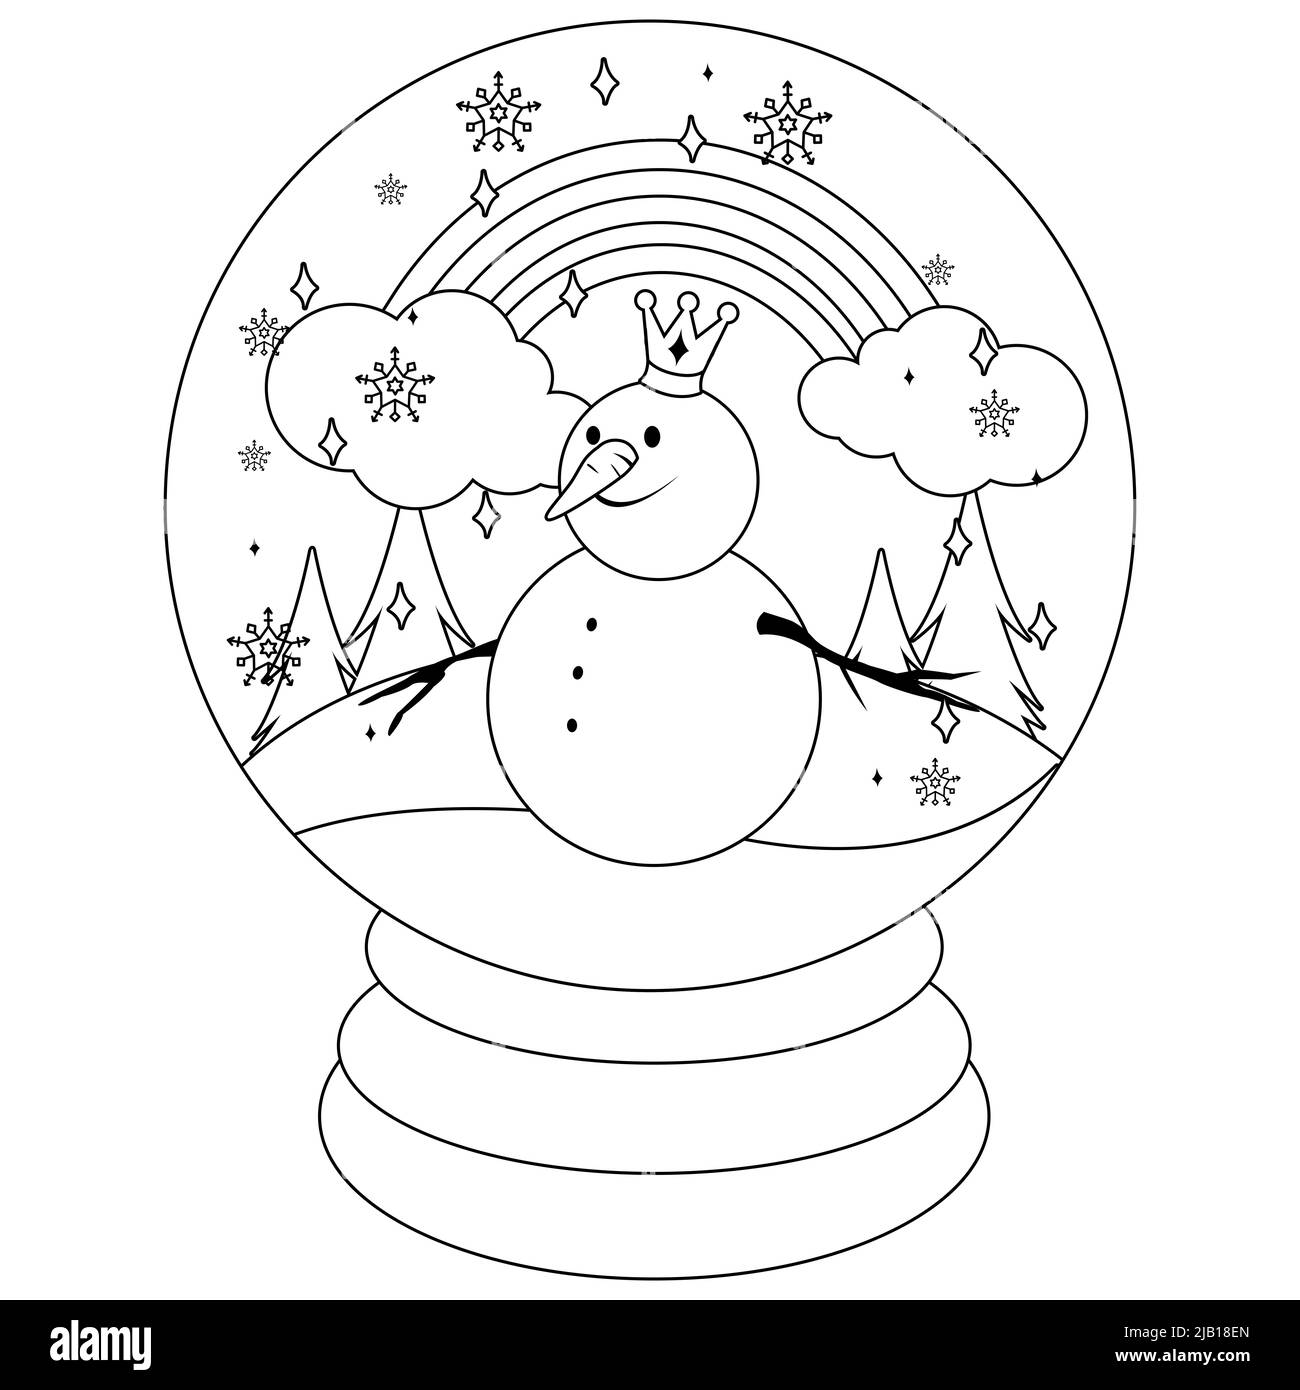 A snowman inside a snow globe. Black and white coloring page Stock Photo